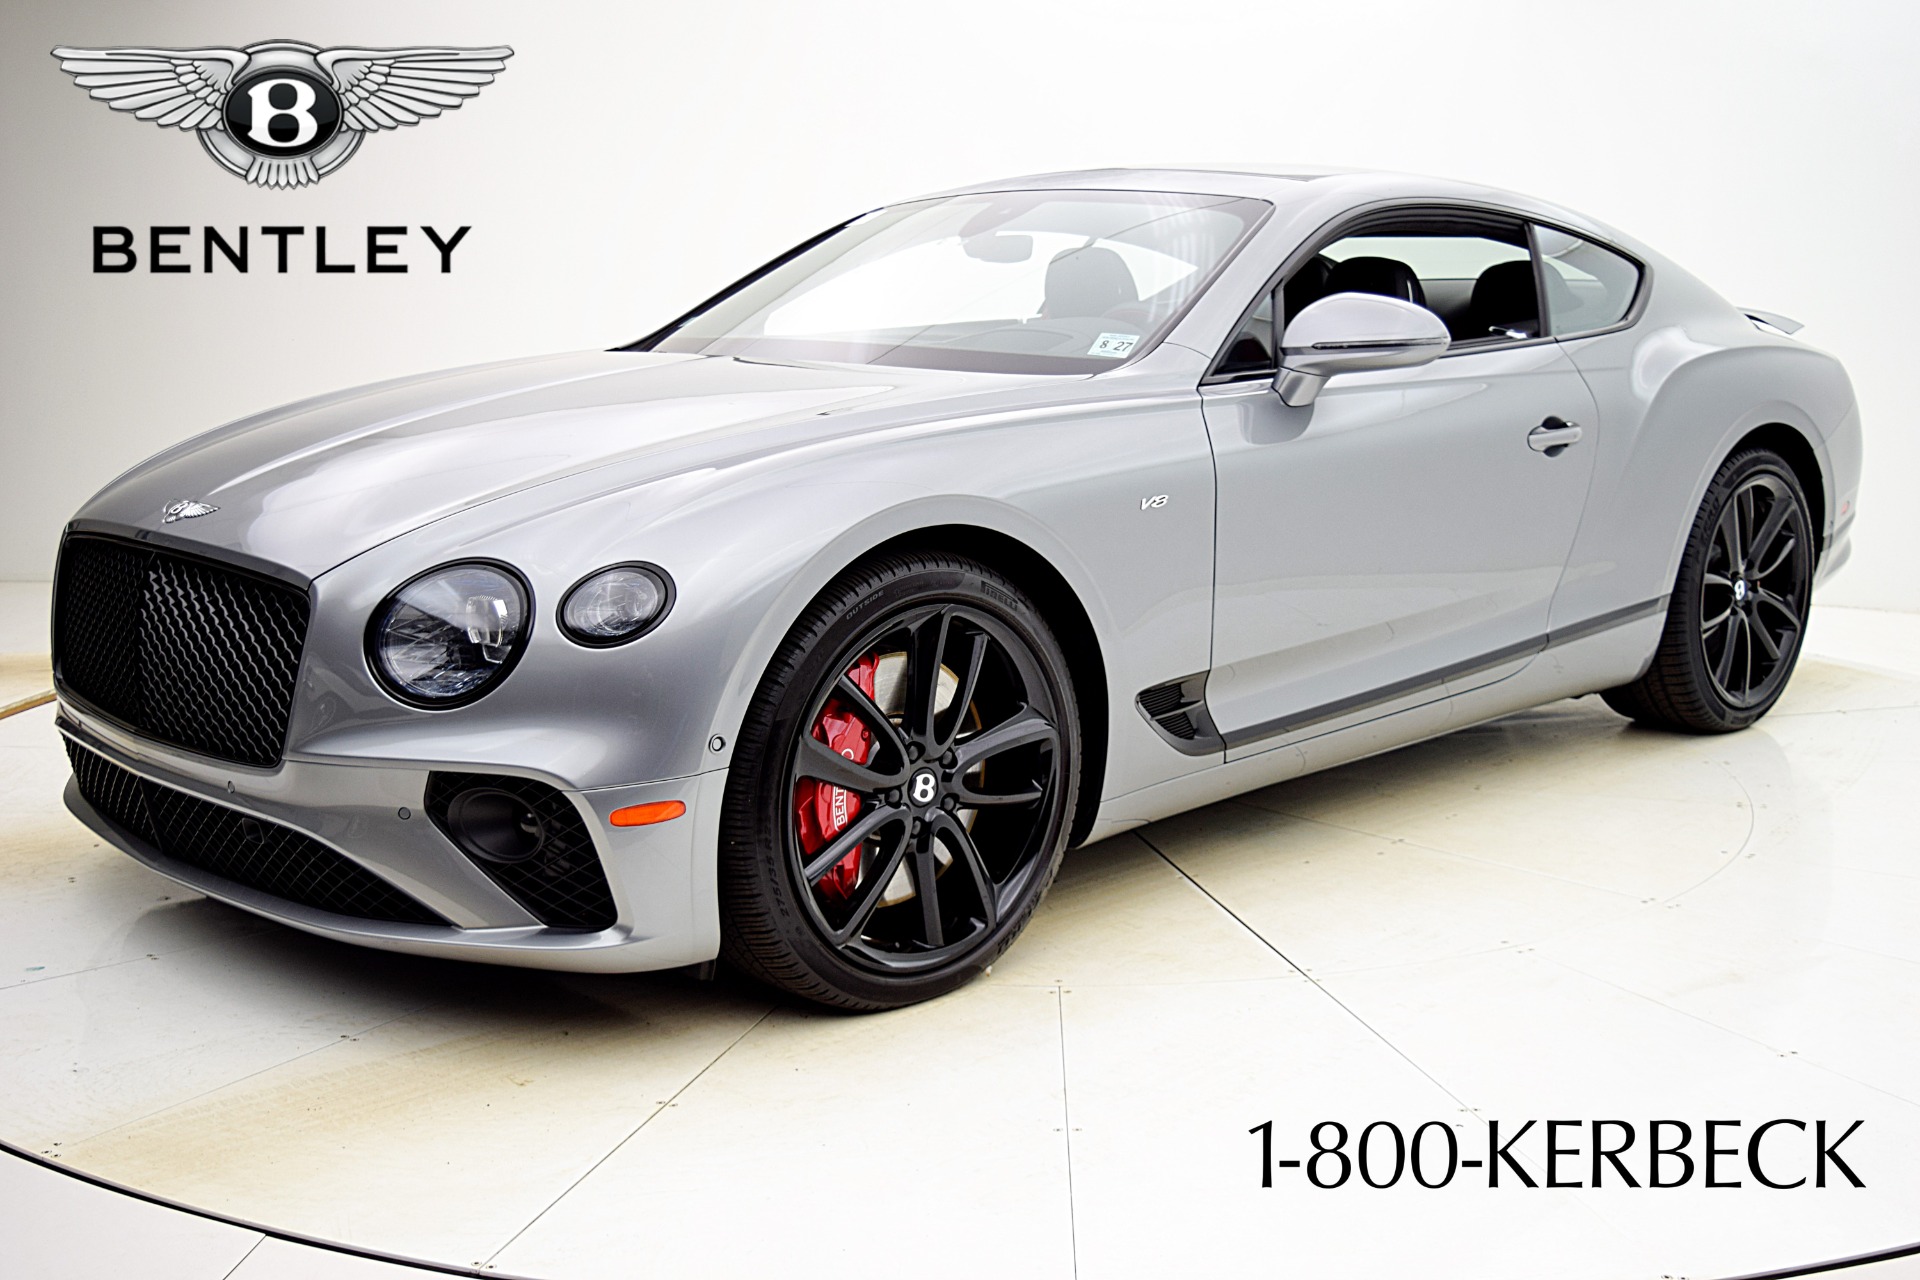 Used 2021 Bentley Continental GT V8/LEASE OPTIONS AVAILABLE for sale $215,000 at Bentley Palmyra N.J. in Palmyra NJ 08065 2